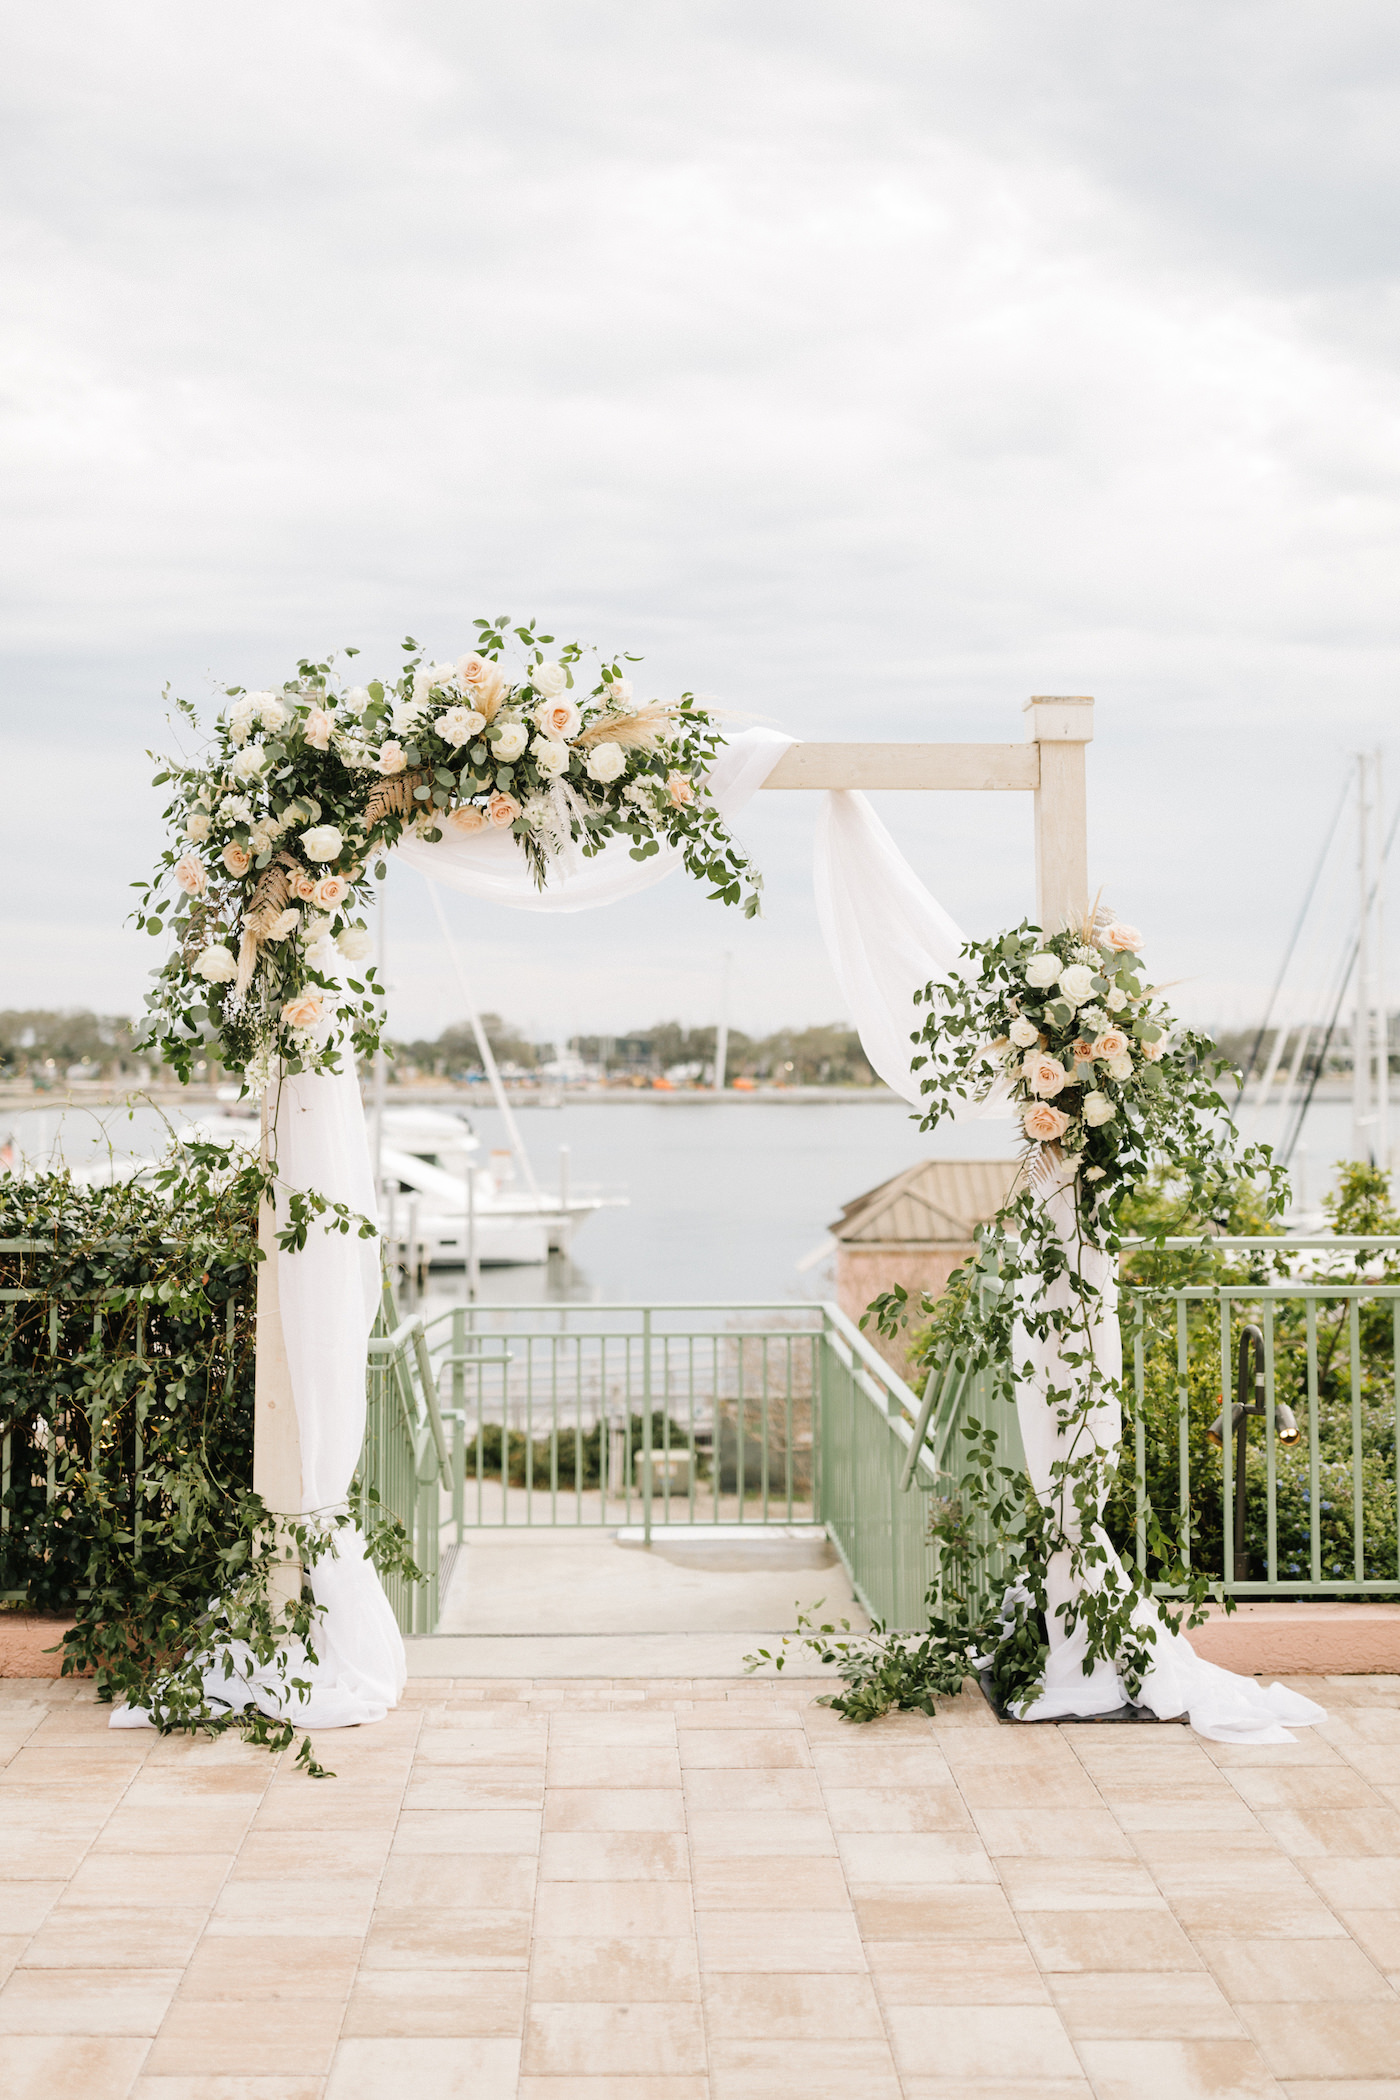 Boho Chic Outdoor Waterfront Ceremony, White Wooden Arch with White Linen Draping, Decorated with Lush Ivory Flowers and Blush Pink Roses, Pampas Grass Bouquets with Greenery | The Esplanade Location of the Vinoy Renaissance Resort in Downtown St. Petersburg | Tampa Bay Luxury Wedding Planner Parties A’ La Carte | Rentals A Chair Affair | Rentals Over the Top Linens